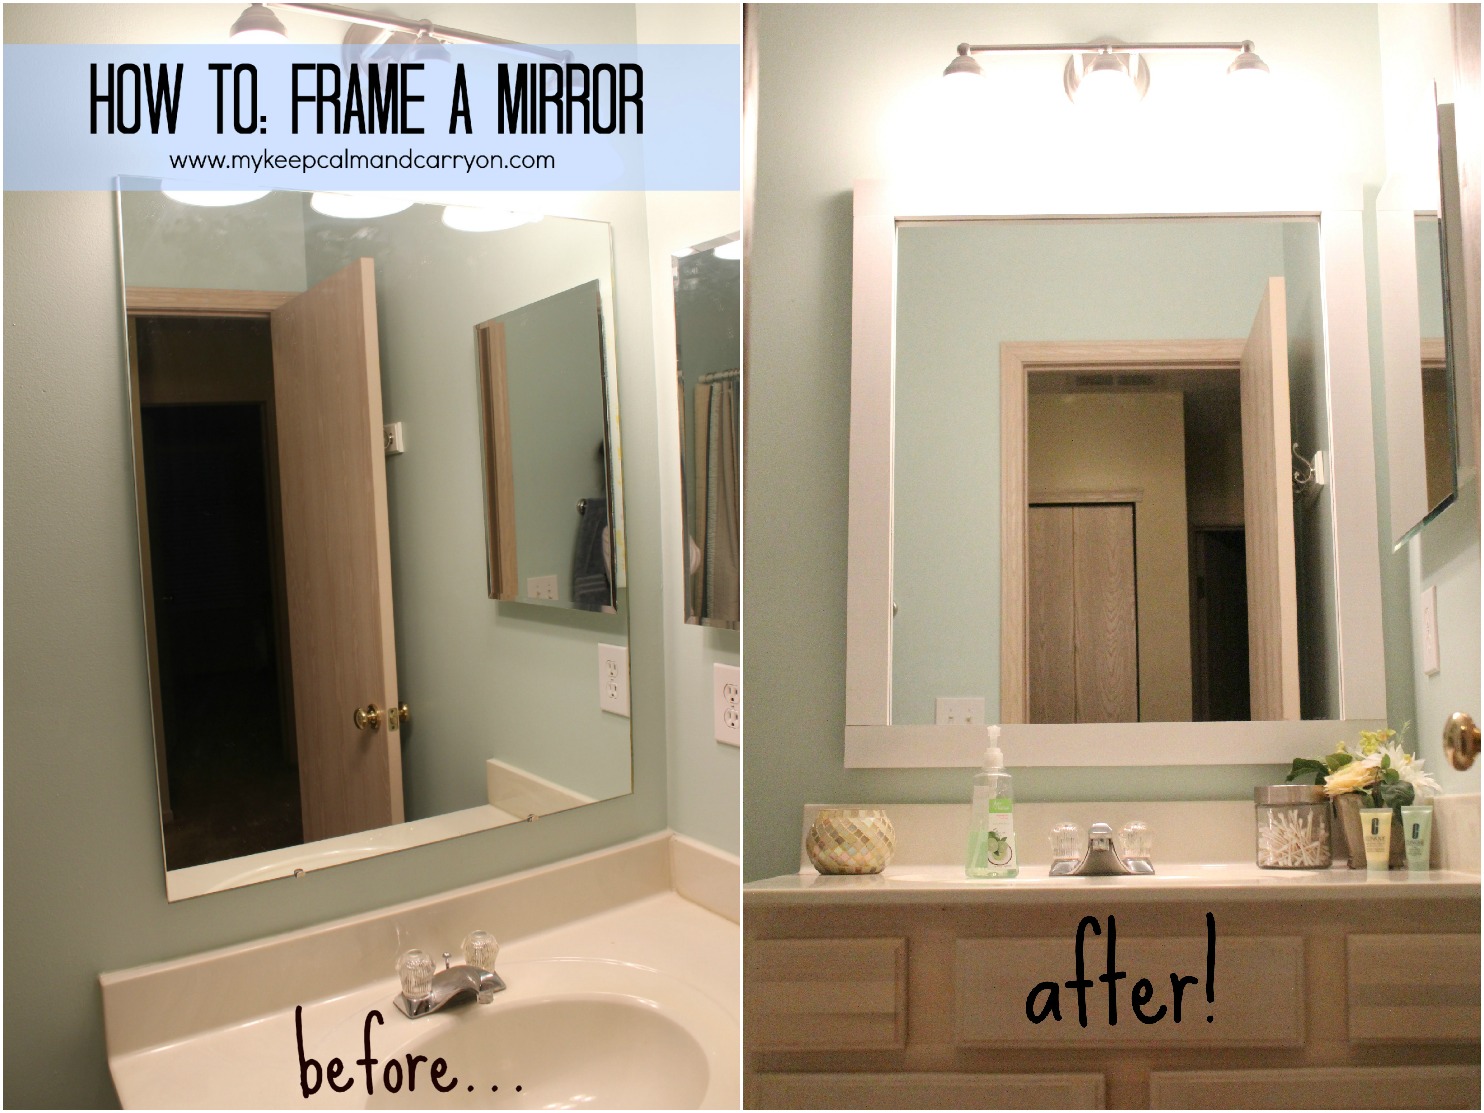 KEEP CALM AND CARRY ON: SPD: HOW TO FRAME A MIRROR